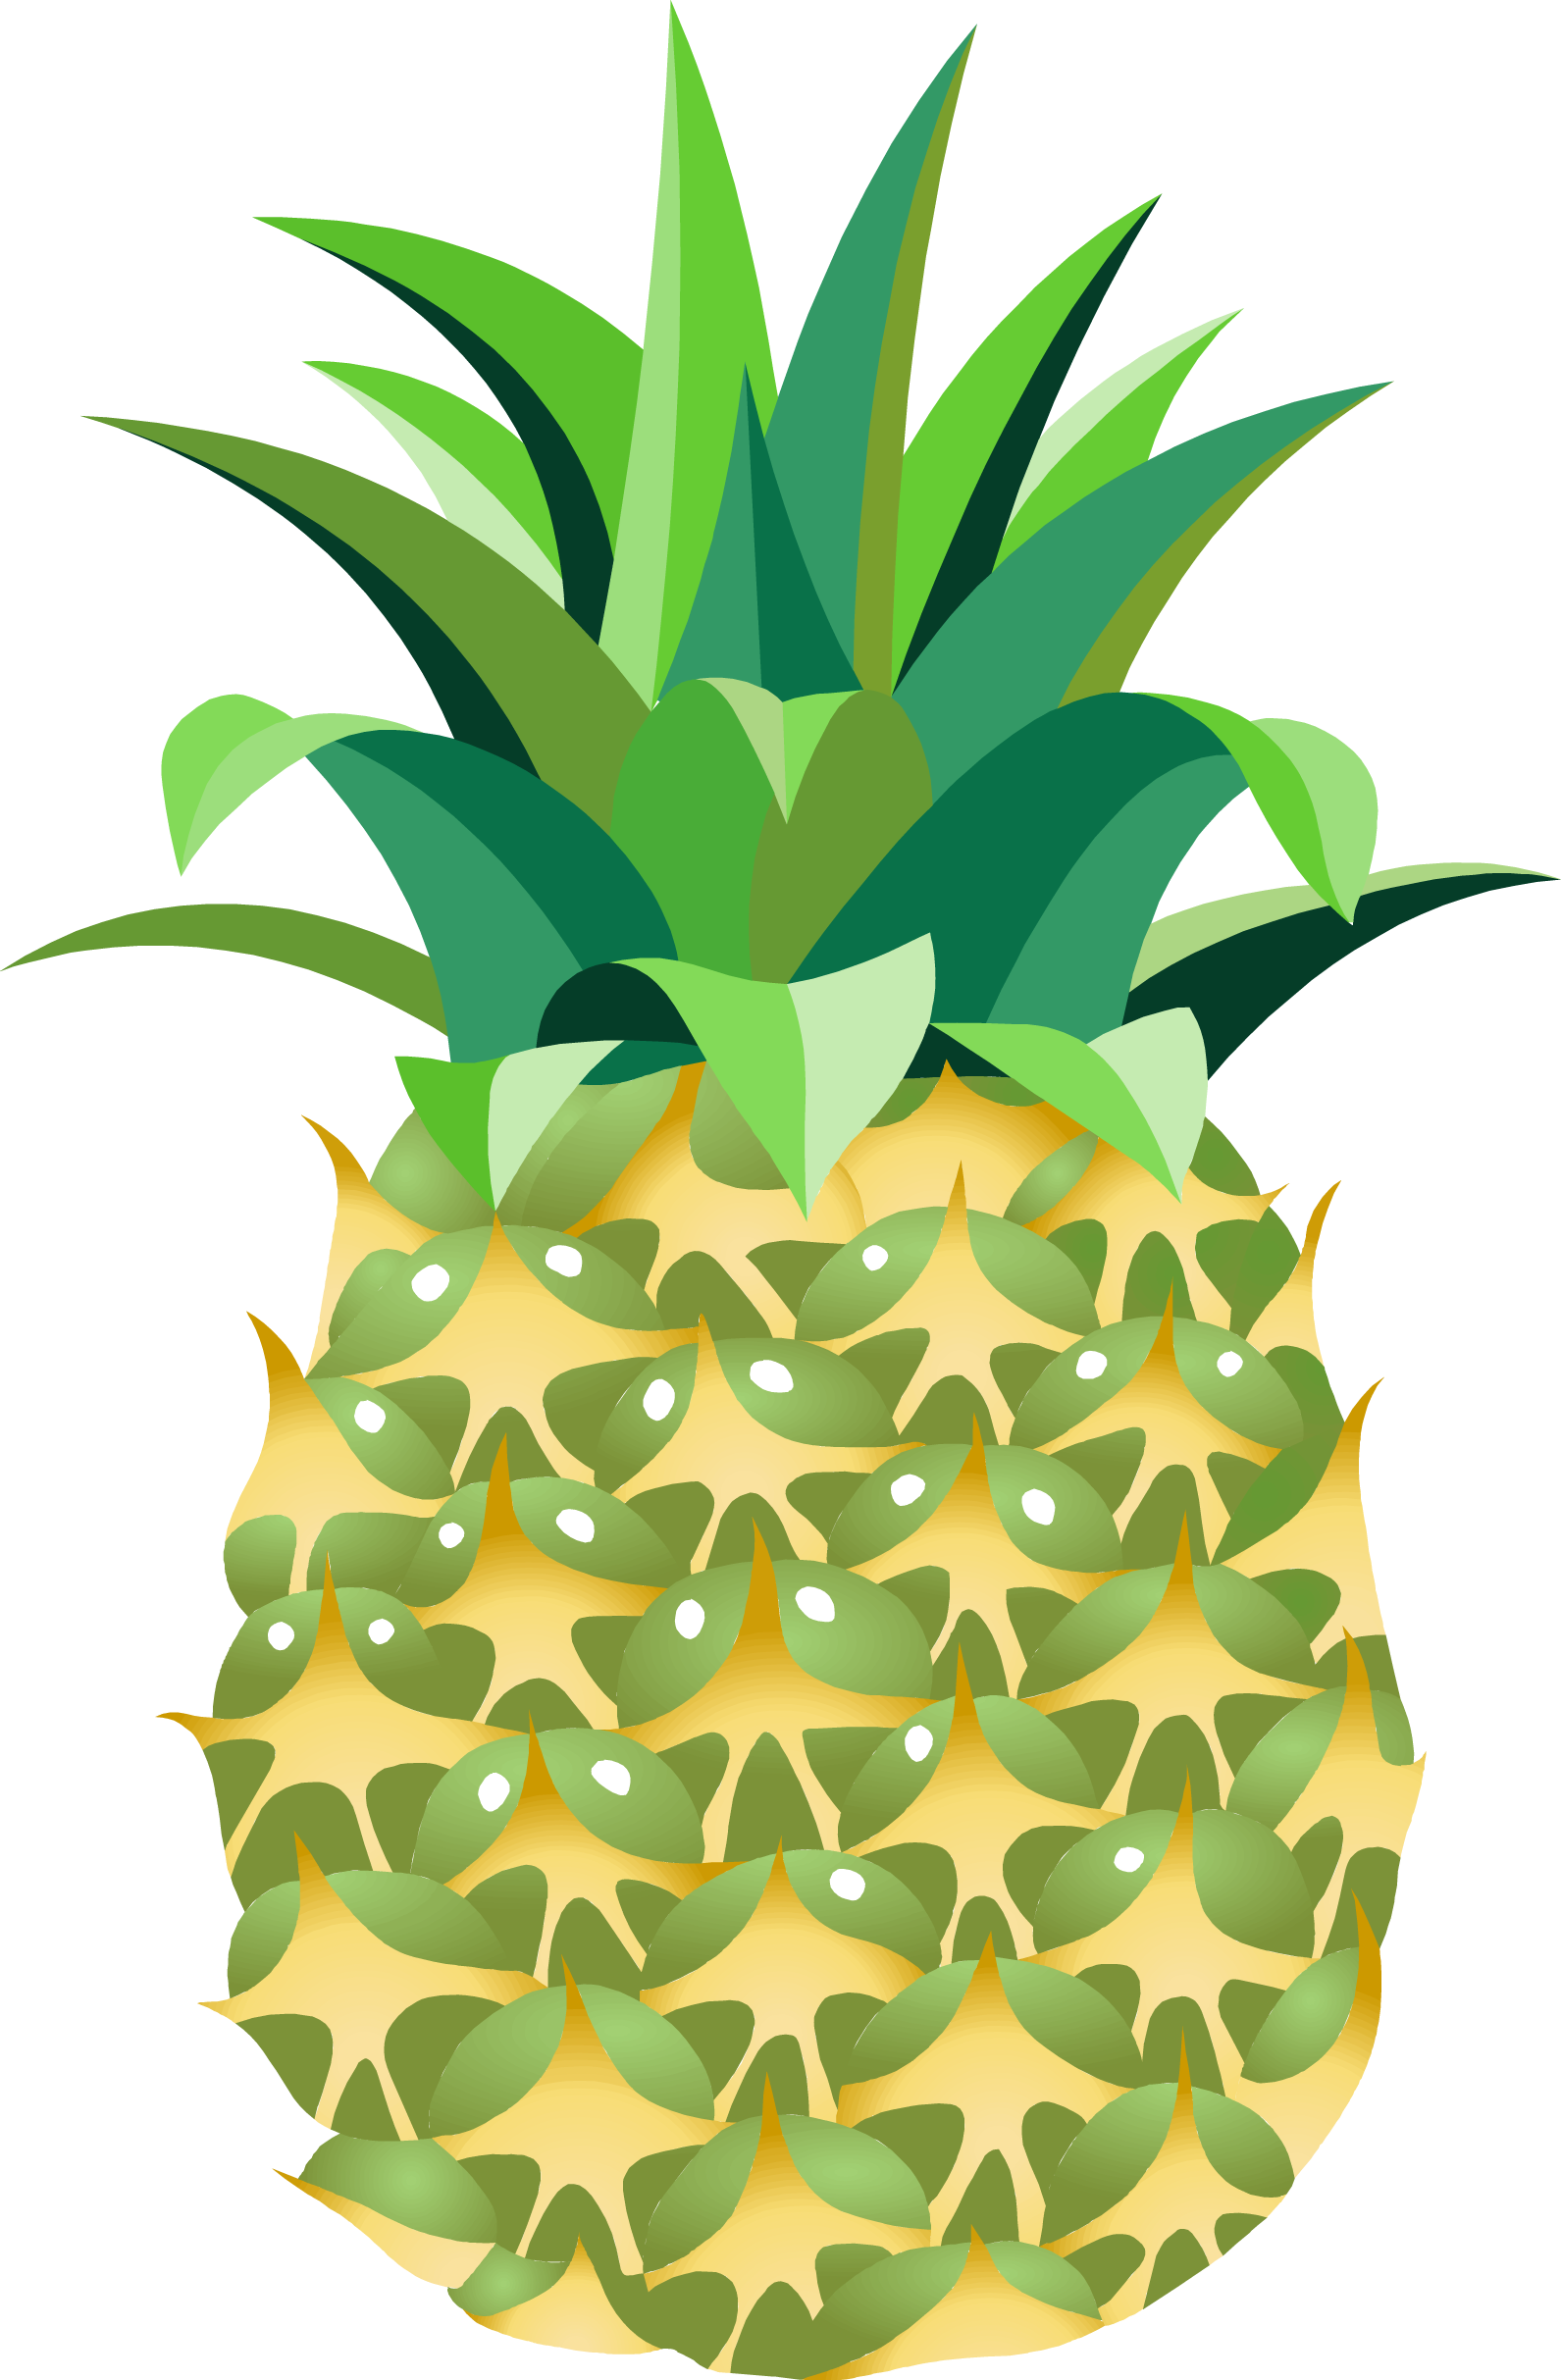 Pineapple Png Image, Free Download - Clipart Of Pineapple Png (1591x2426)